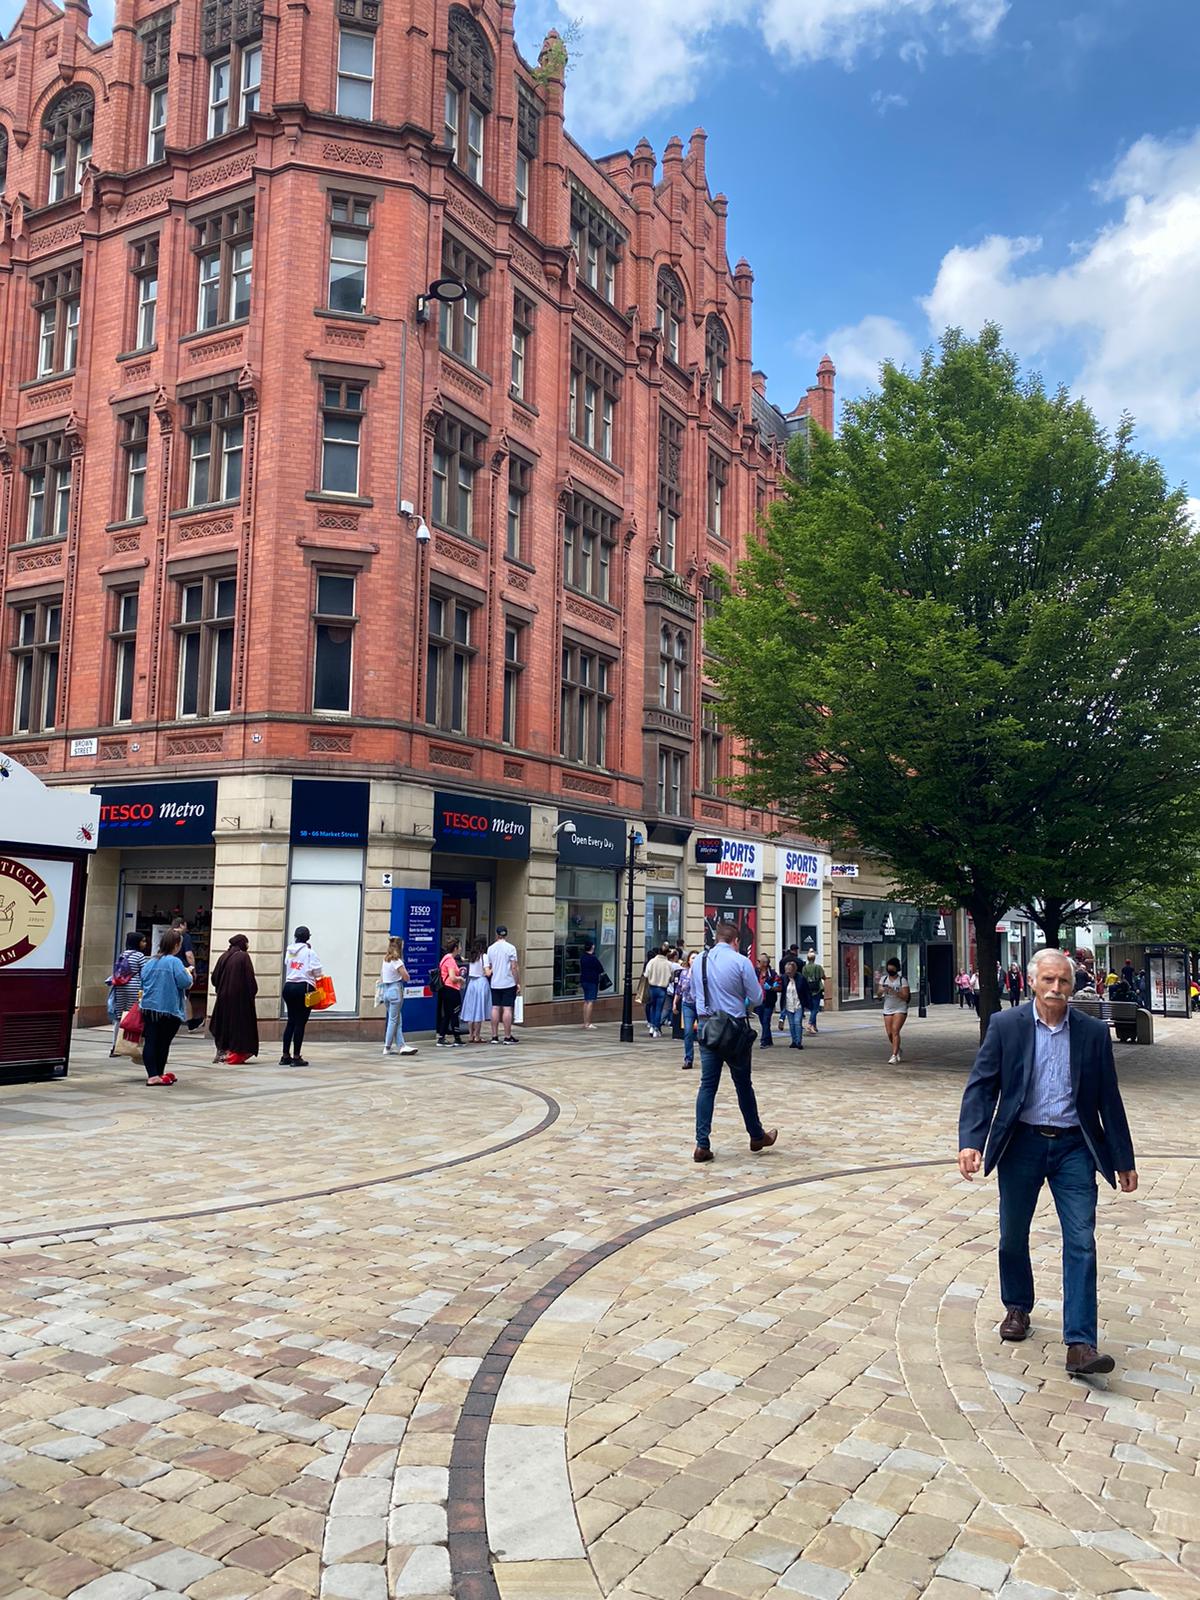 Photos: Manchester comes back to life as shops and businesses reopen, The Manc